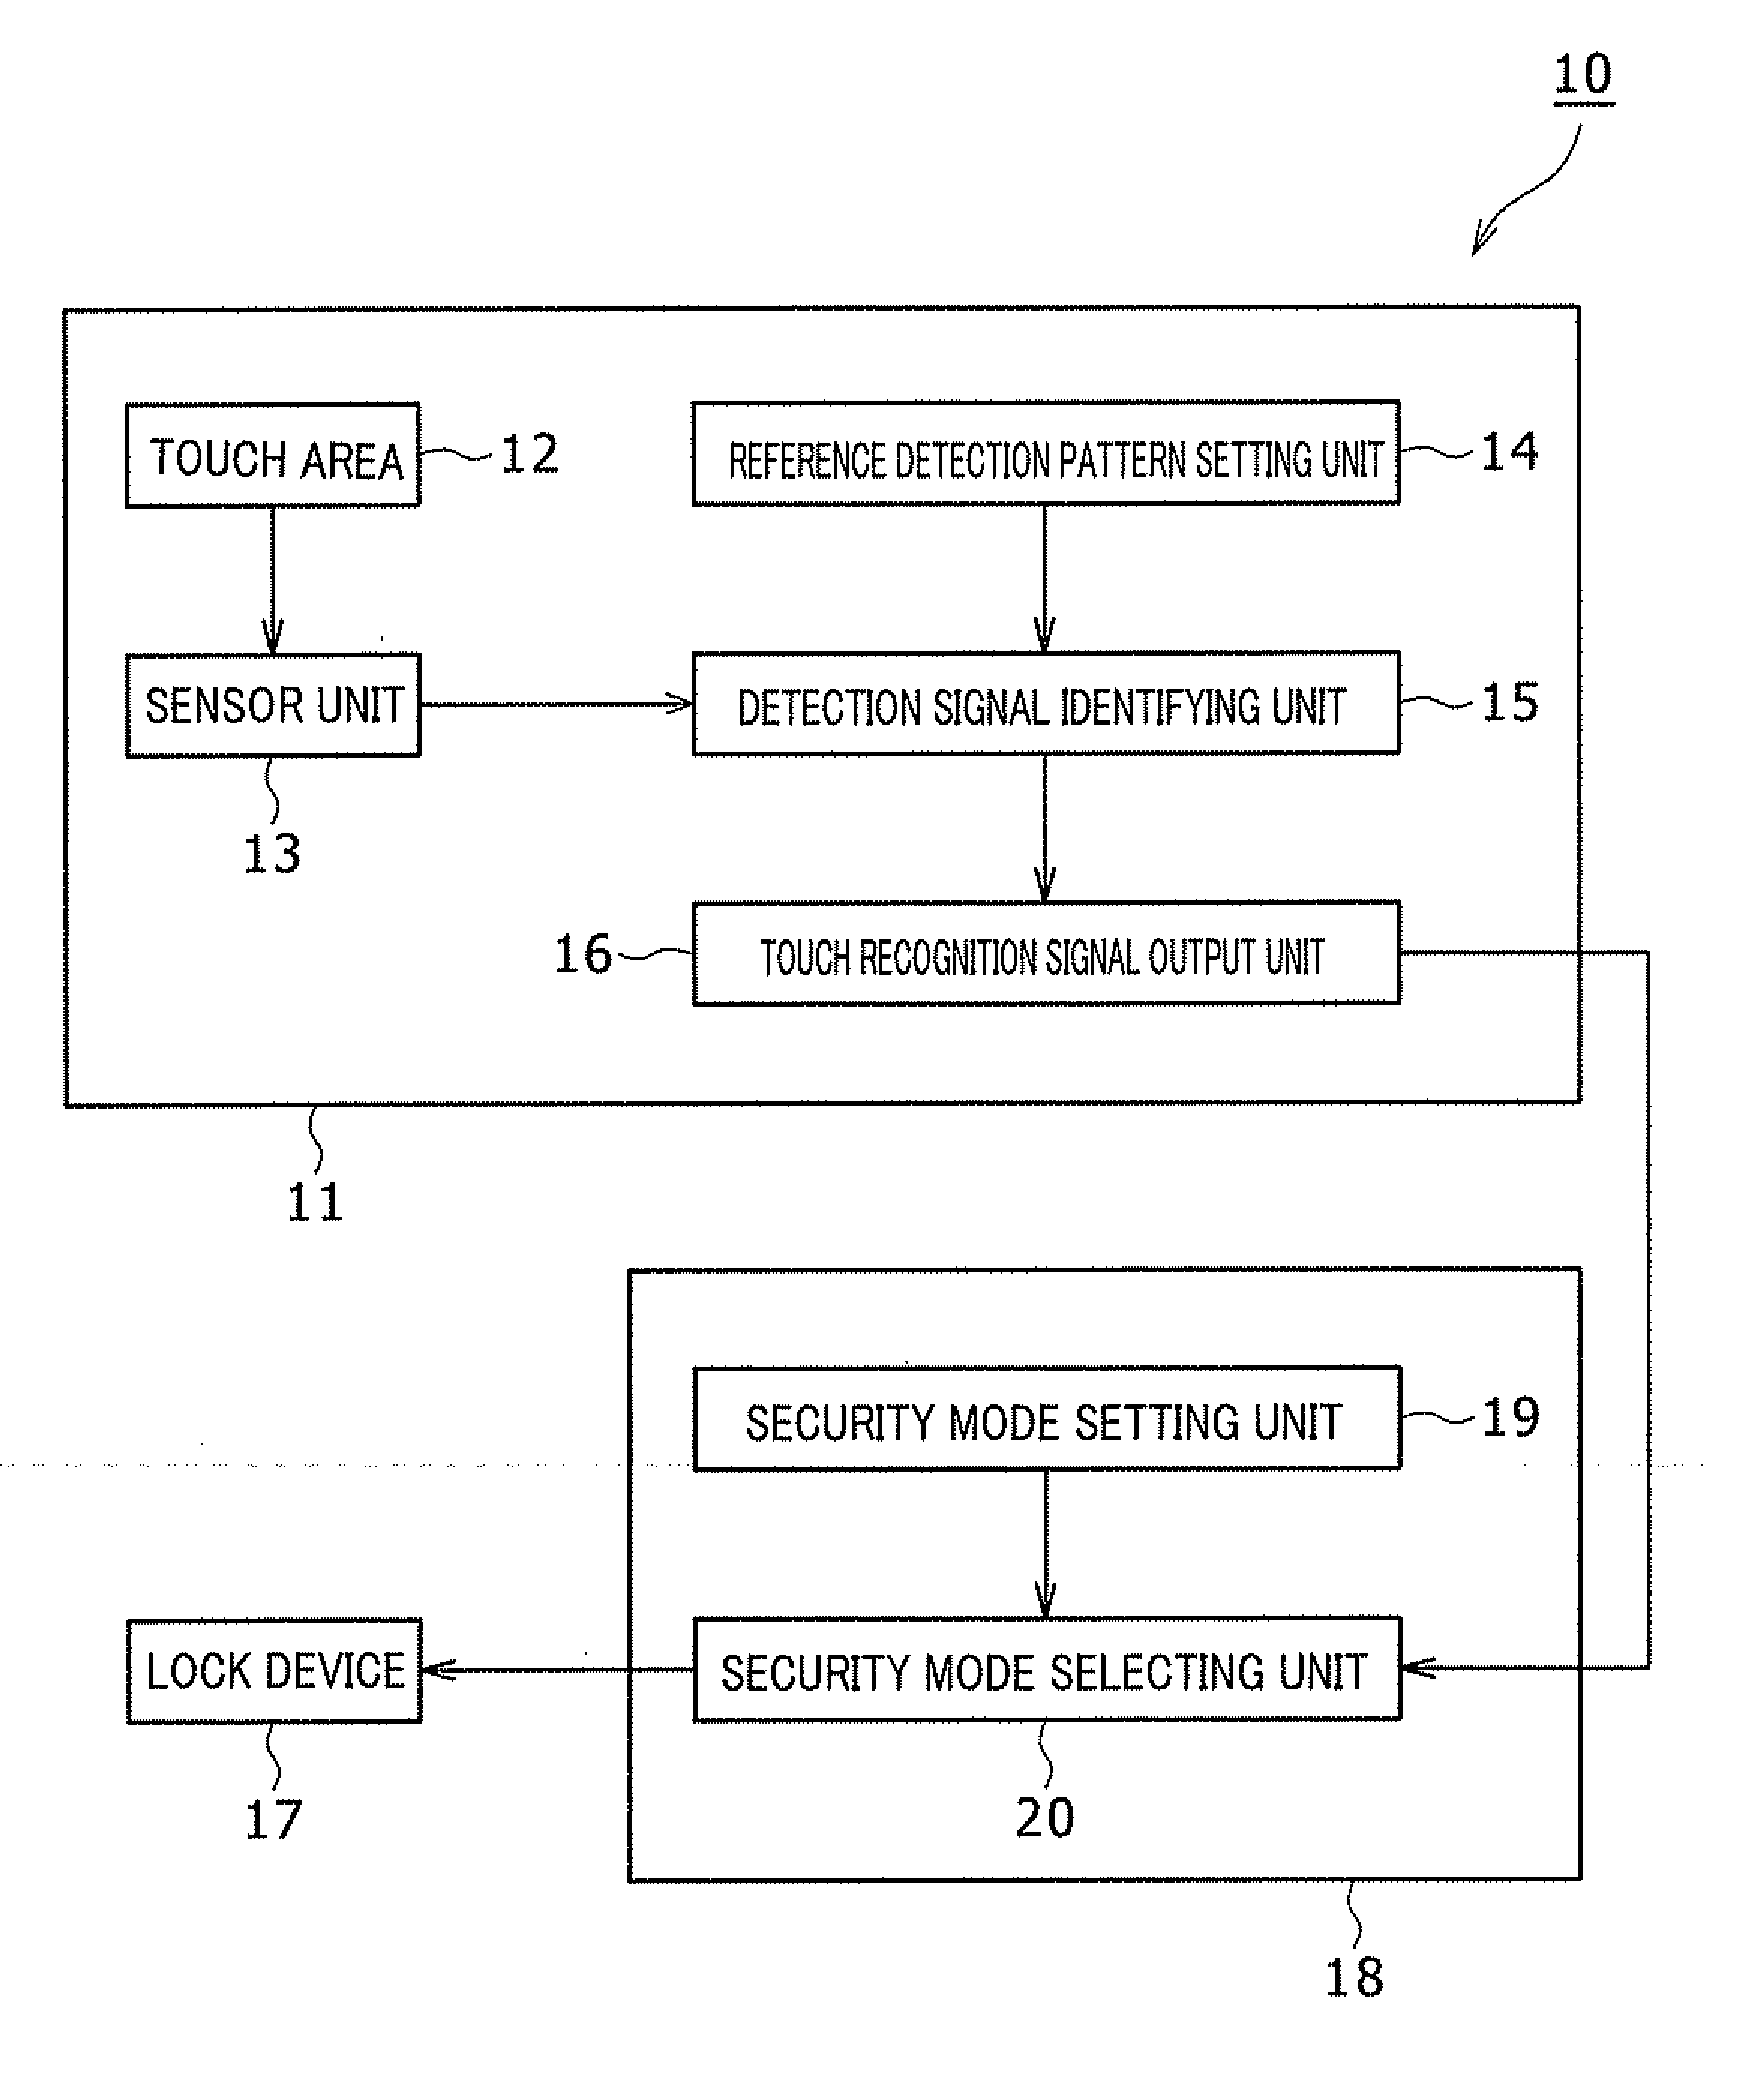 Contact detection device for vehicular use and security device for vehicular use